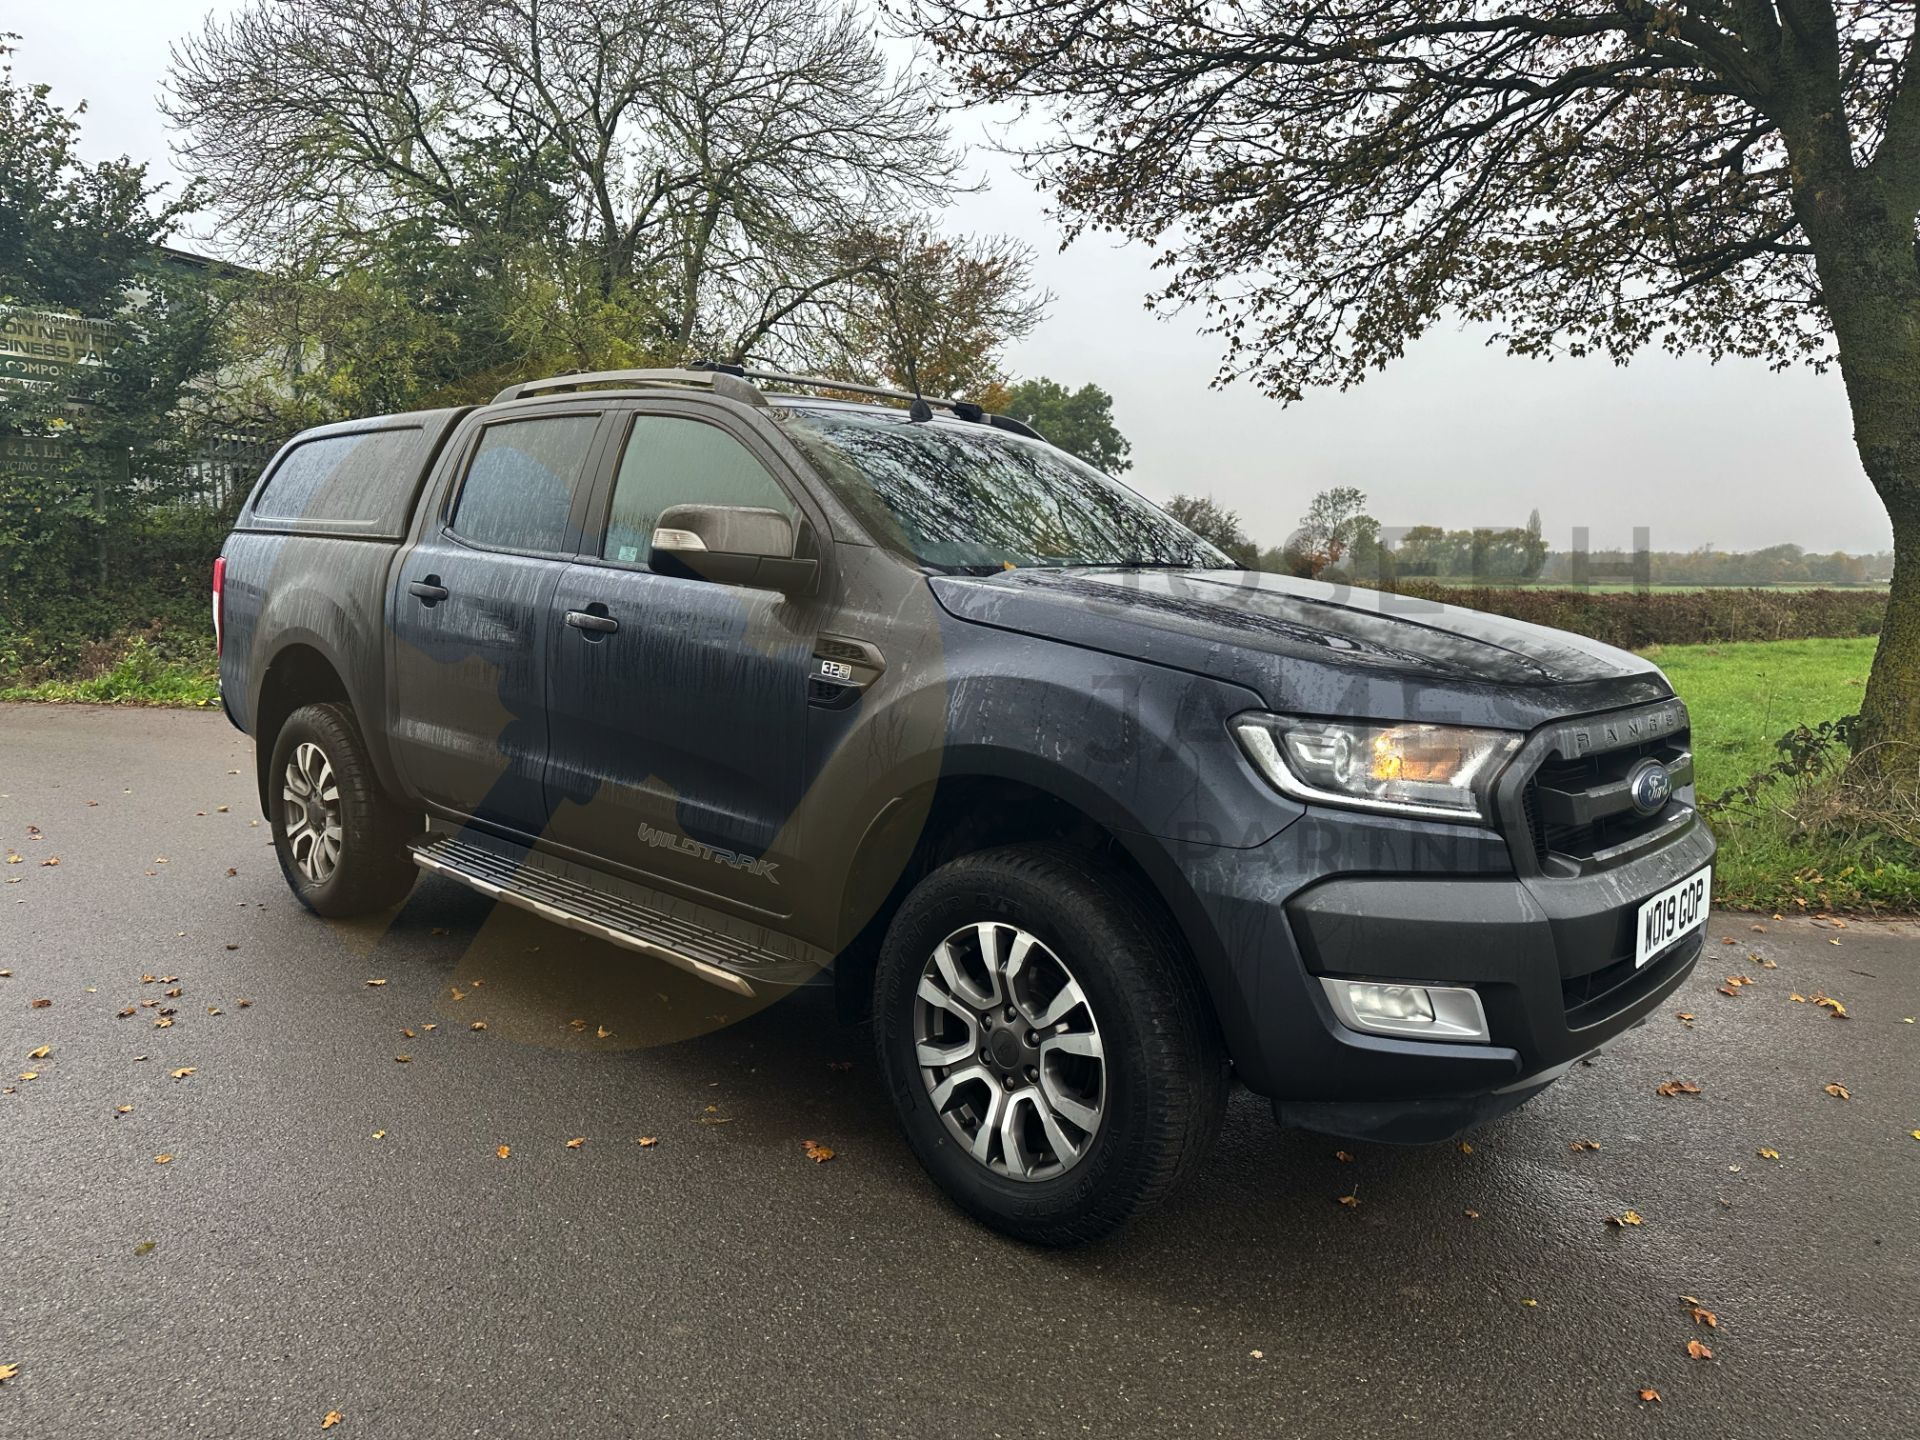 FORD RANGER *WILDTRAK EDITION* DOUBLE CAB PICK-UP (2019 - EURO 6) 3.2 TDCI - AUTOMATIC (1 OWNER) - Image 3 of 52